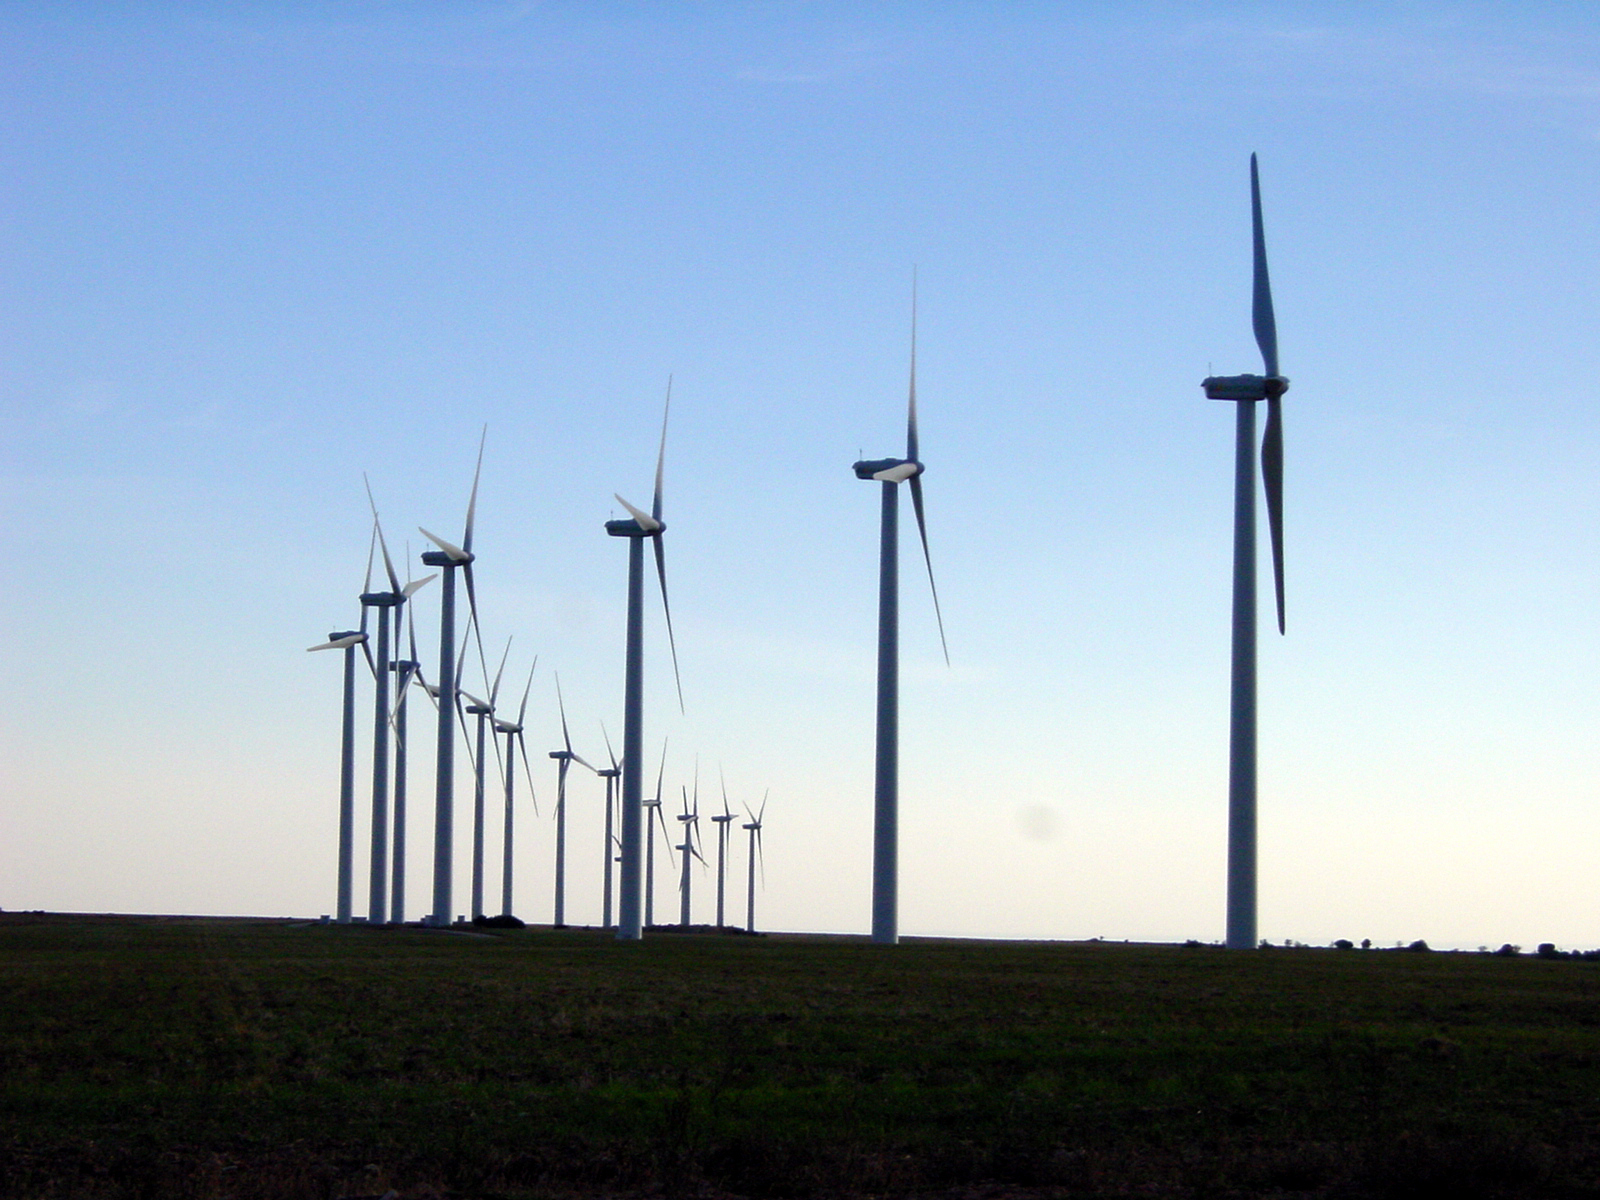 EU wind market grows, but slowed by flagging onshore segment